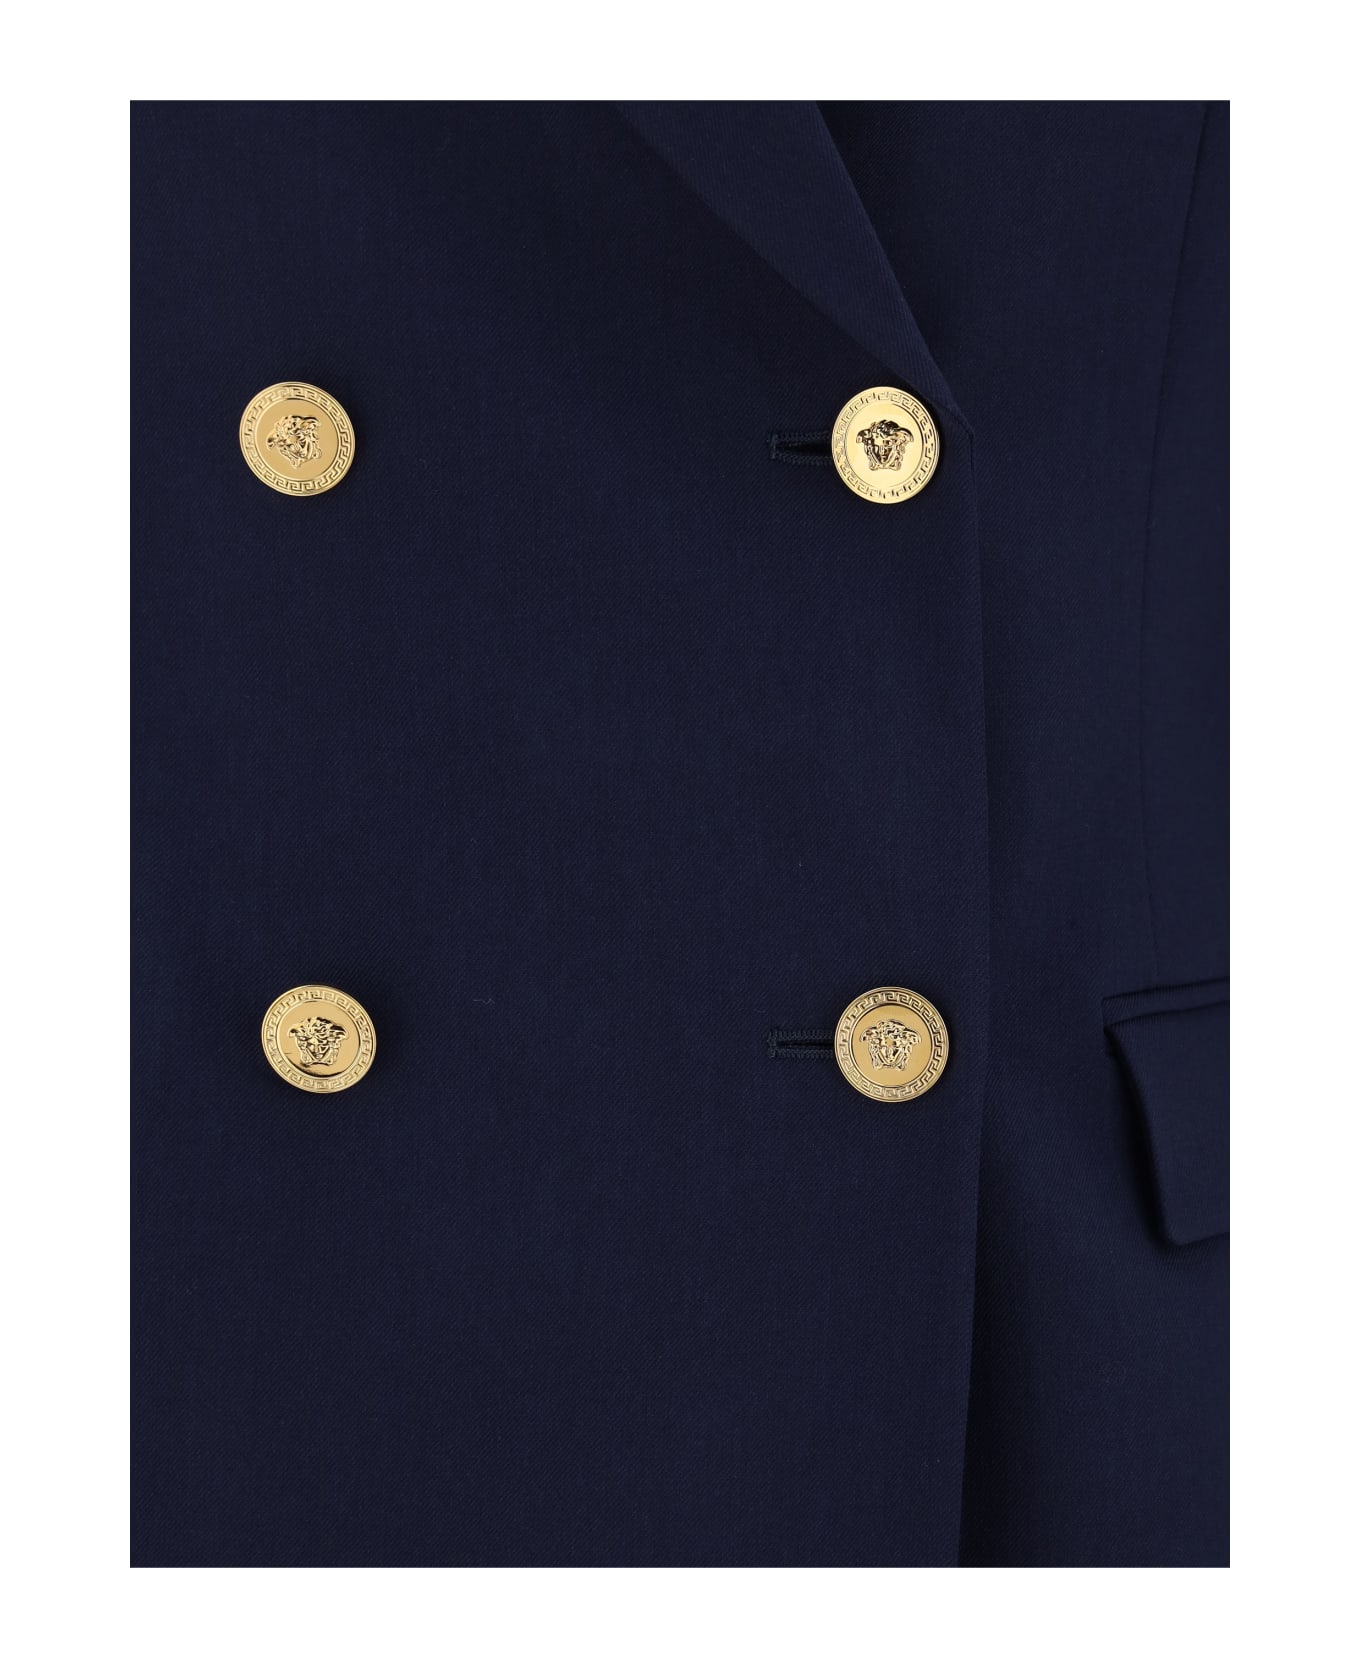 Versace Logo Patched Dinner Jacket - Navy Blue ブレザー